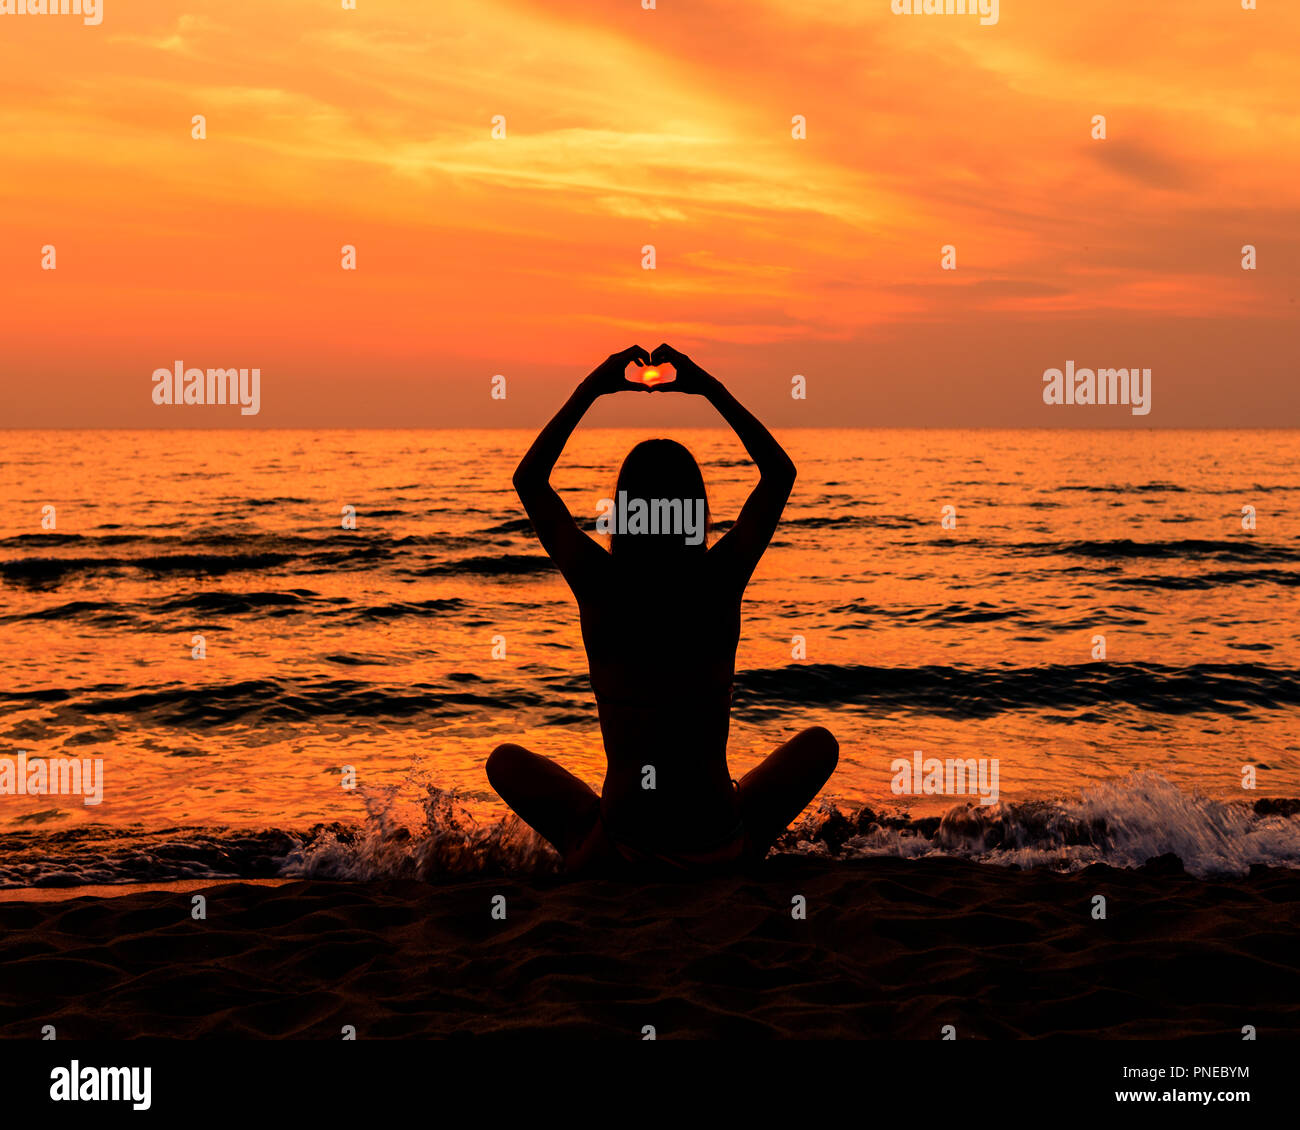 Teen Girl In A Bathing Suit With Long Hair At The Beach In Silhouette During Sunset Making A Heart With Her Hands Stock Photo